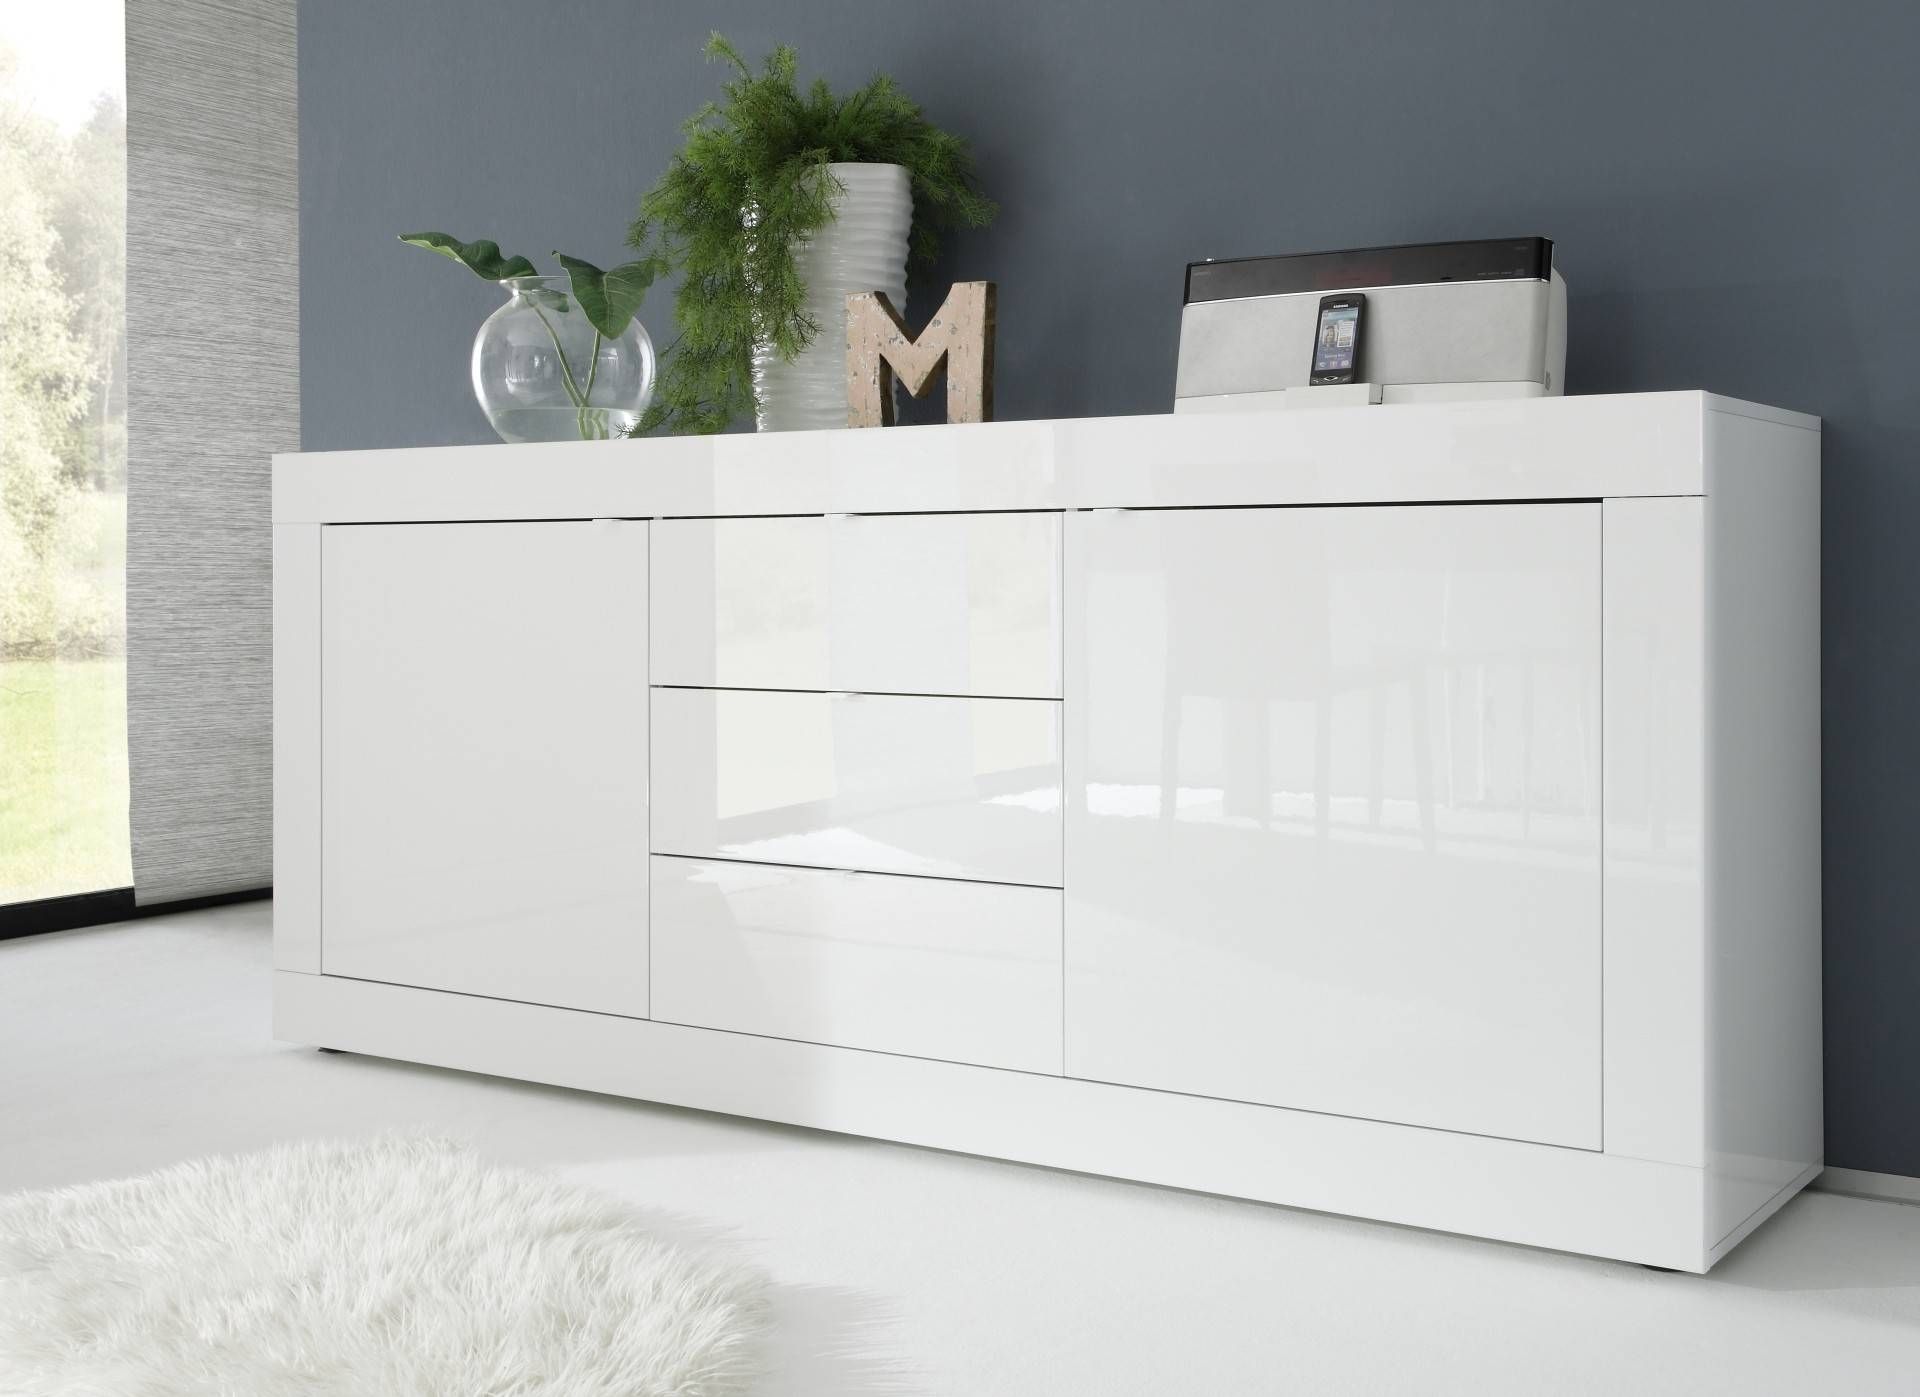 Dolcevita Three Door Sideboard In White Gloss – Sideboards – Sena Within Latest High White Gloss Sideboards (View 14 of 15)